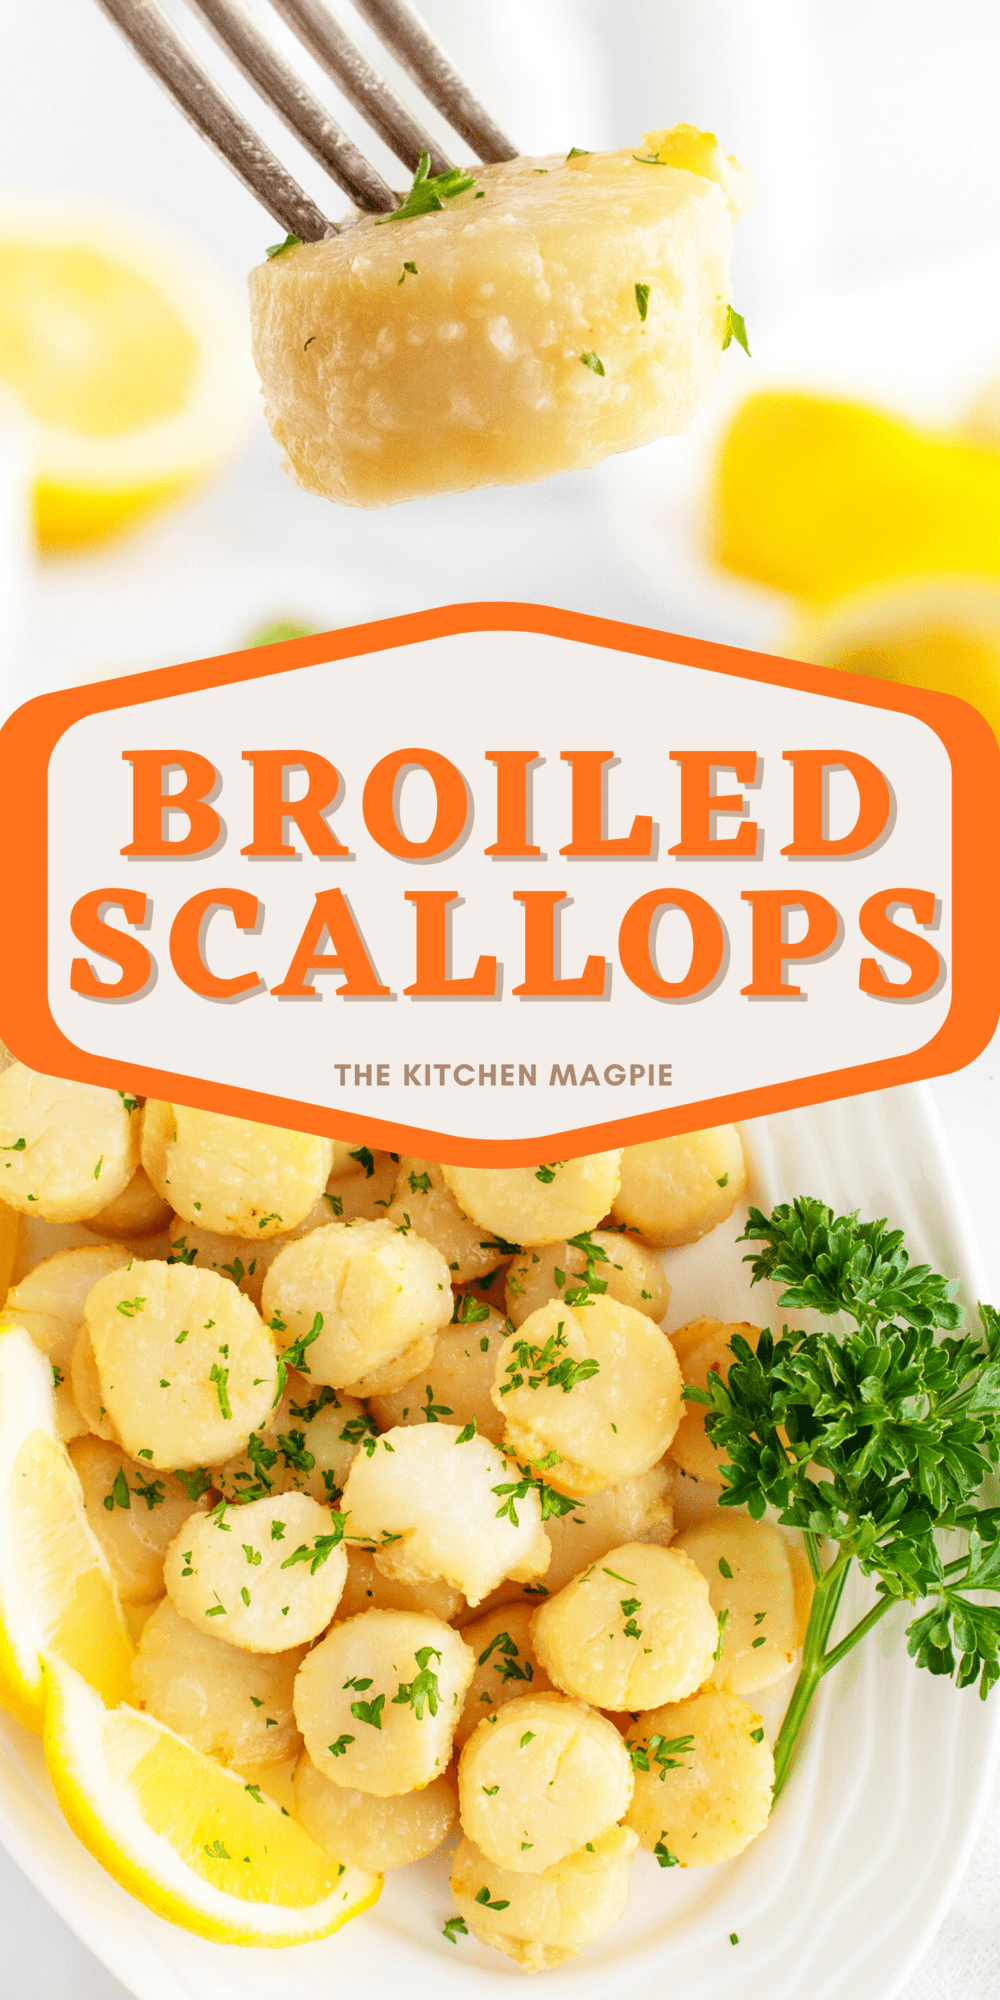 Cooking scallops doesn’t have to be frightening – you can easily make scallops at home with this recipe in your oven!